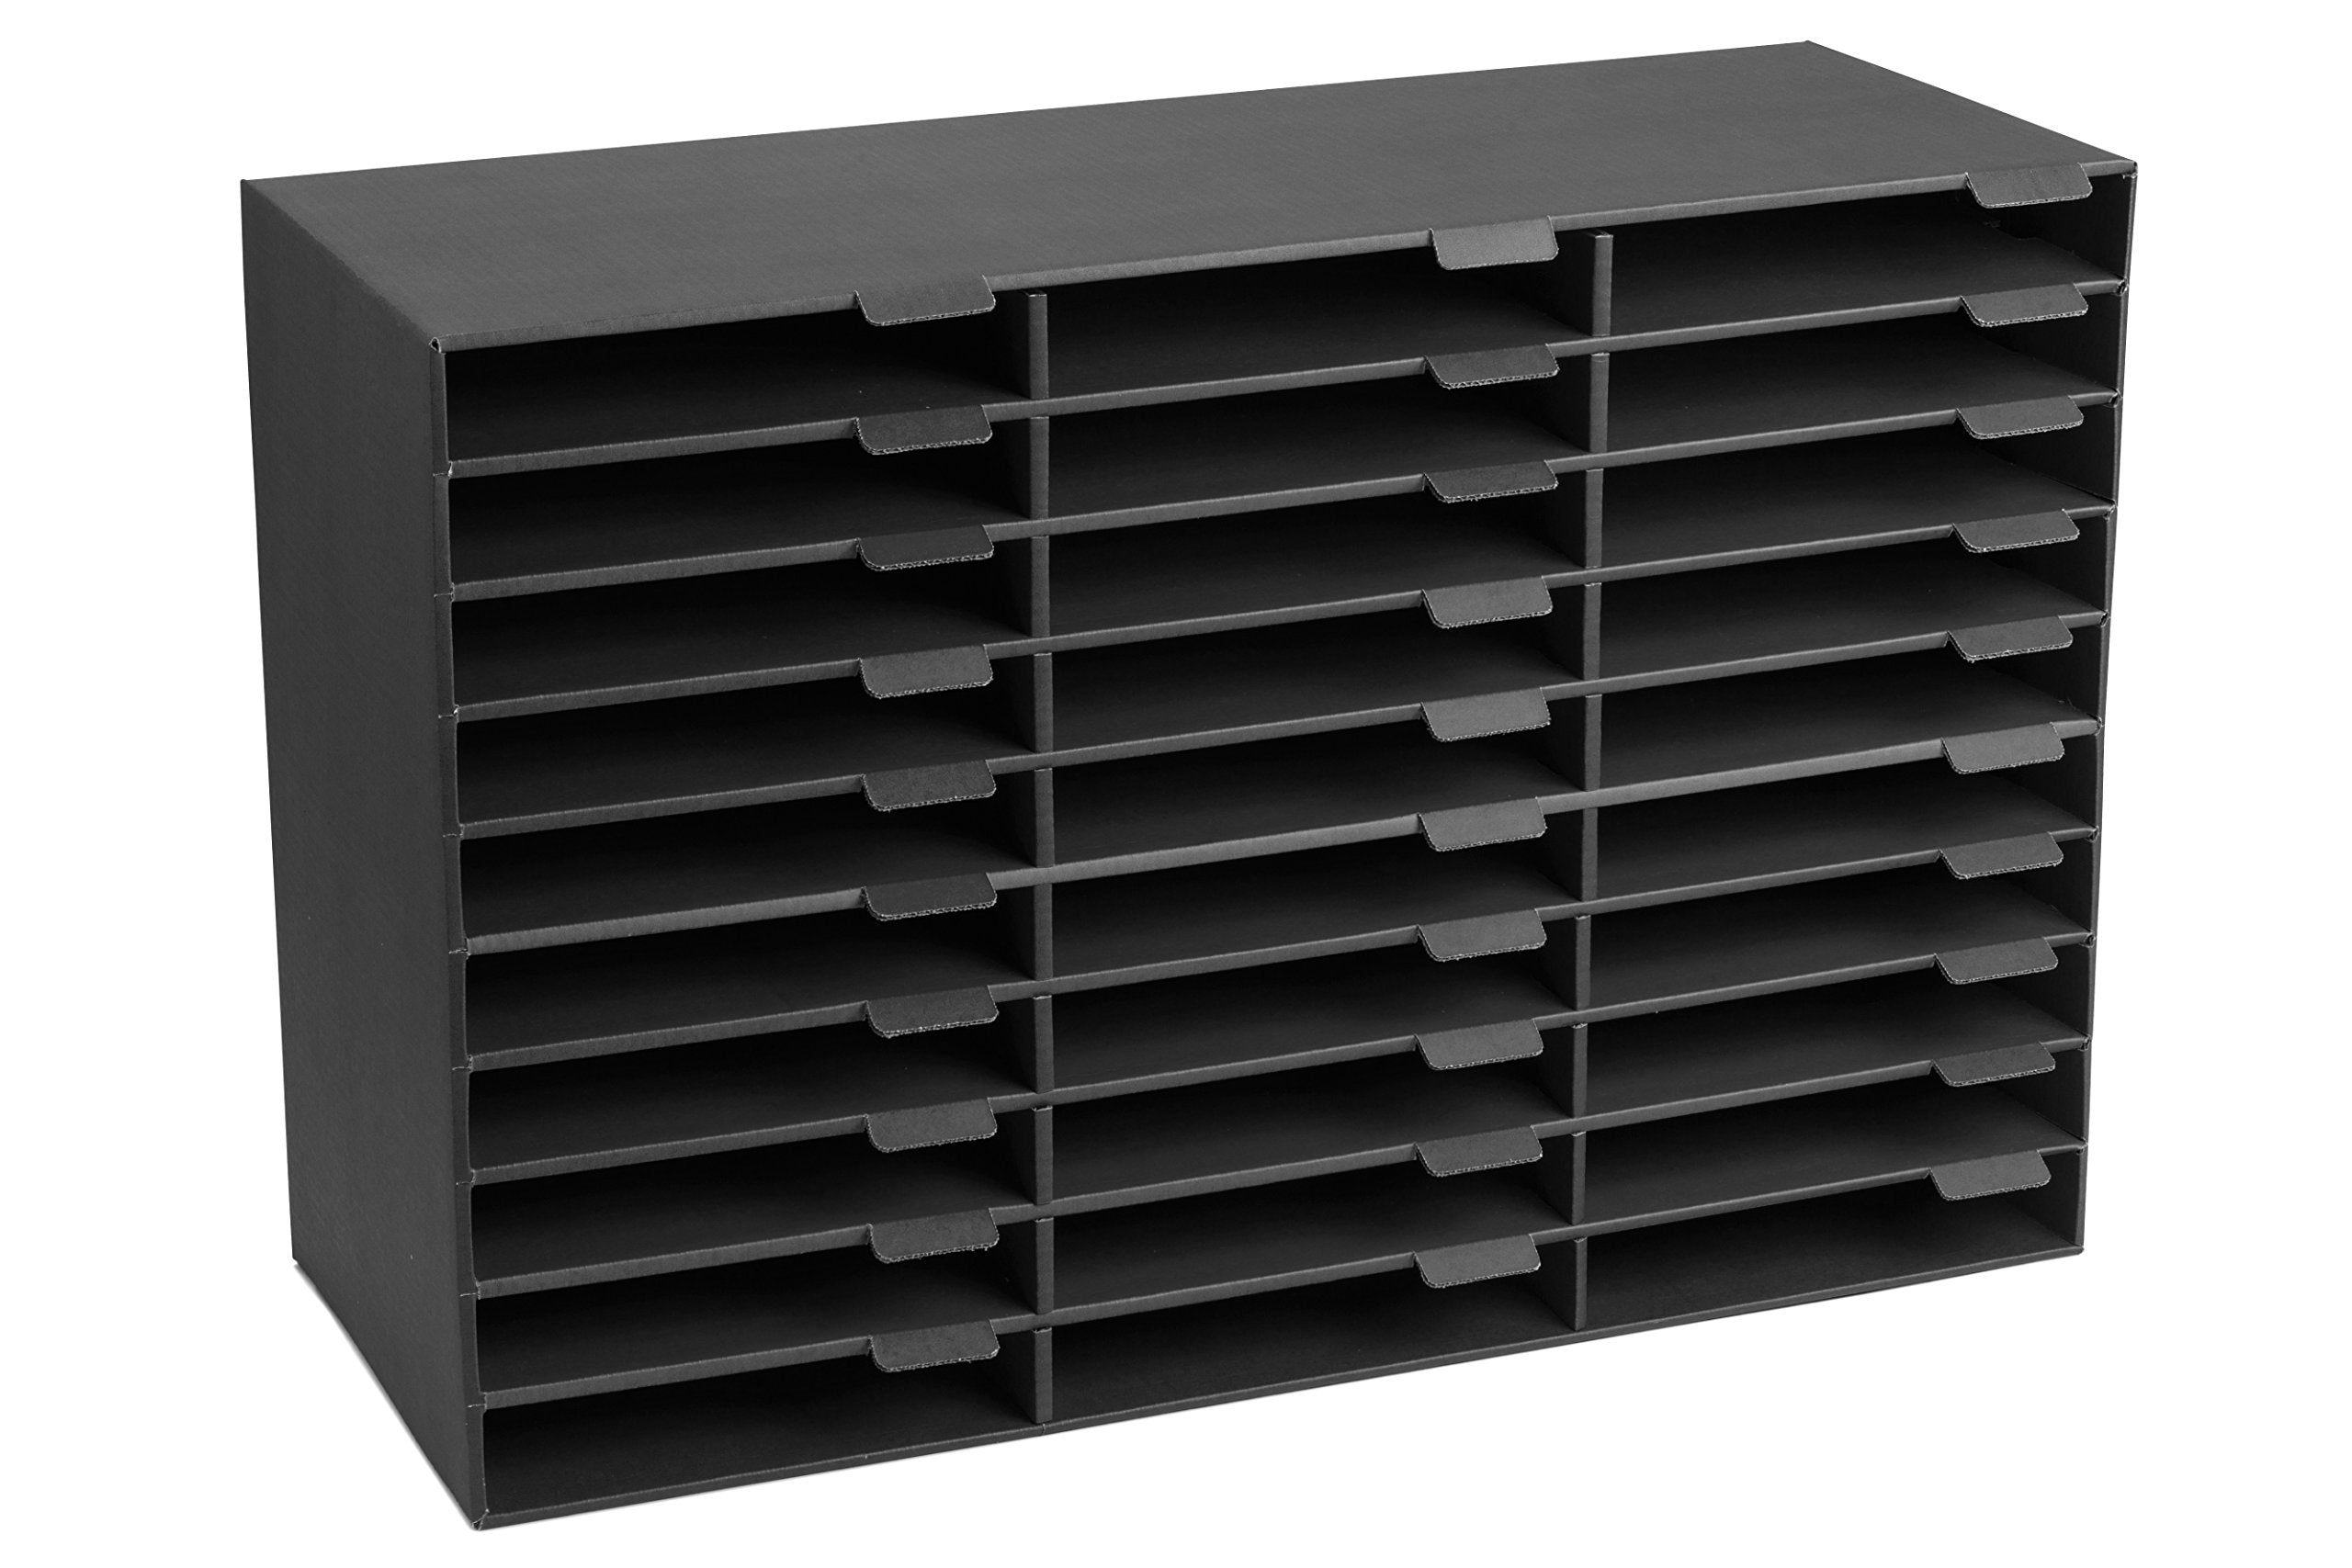 AdirOffice Cardboard Paper Organizer - Classroom Mailbox , Literature Organizers , Office Sorter Mailboxes , Construction papers Storage with Slots , Compartment Shelf Holder (30 Slot, Black)  - Like New